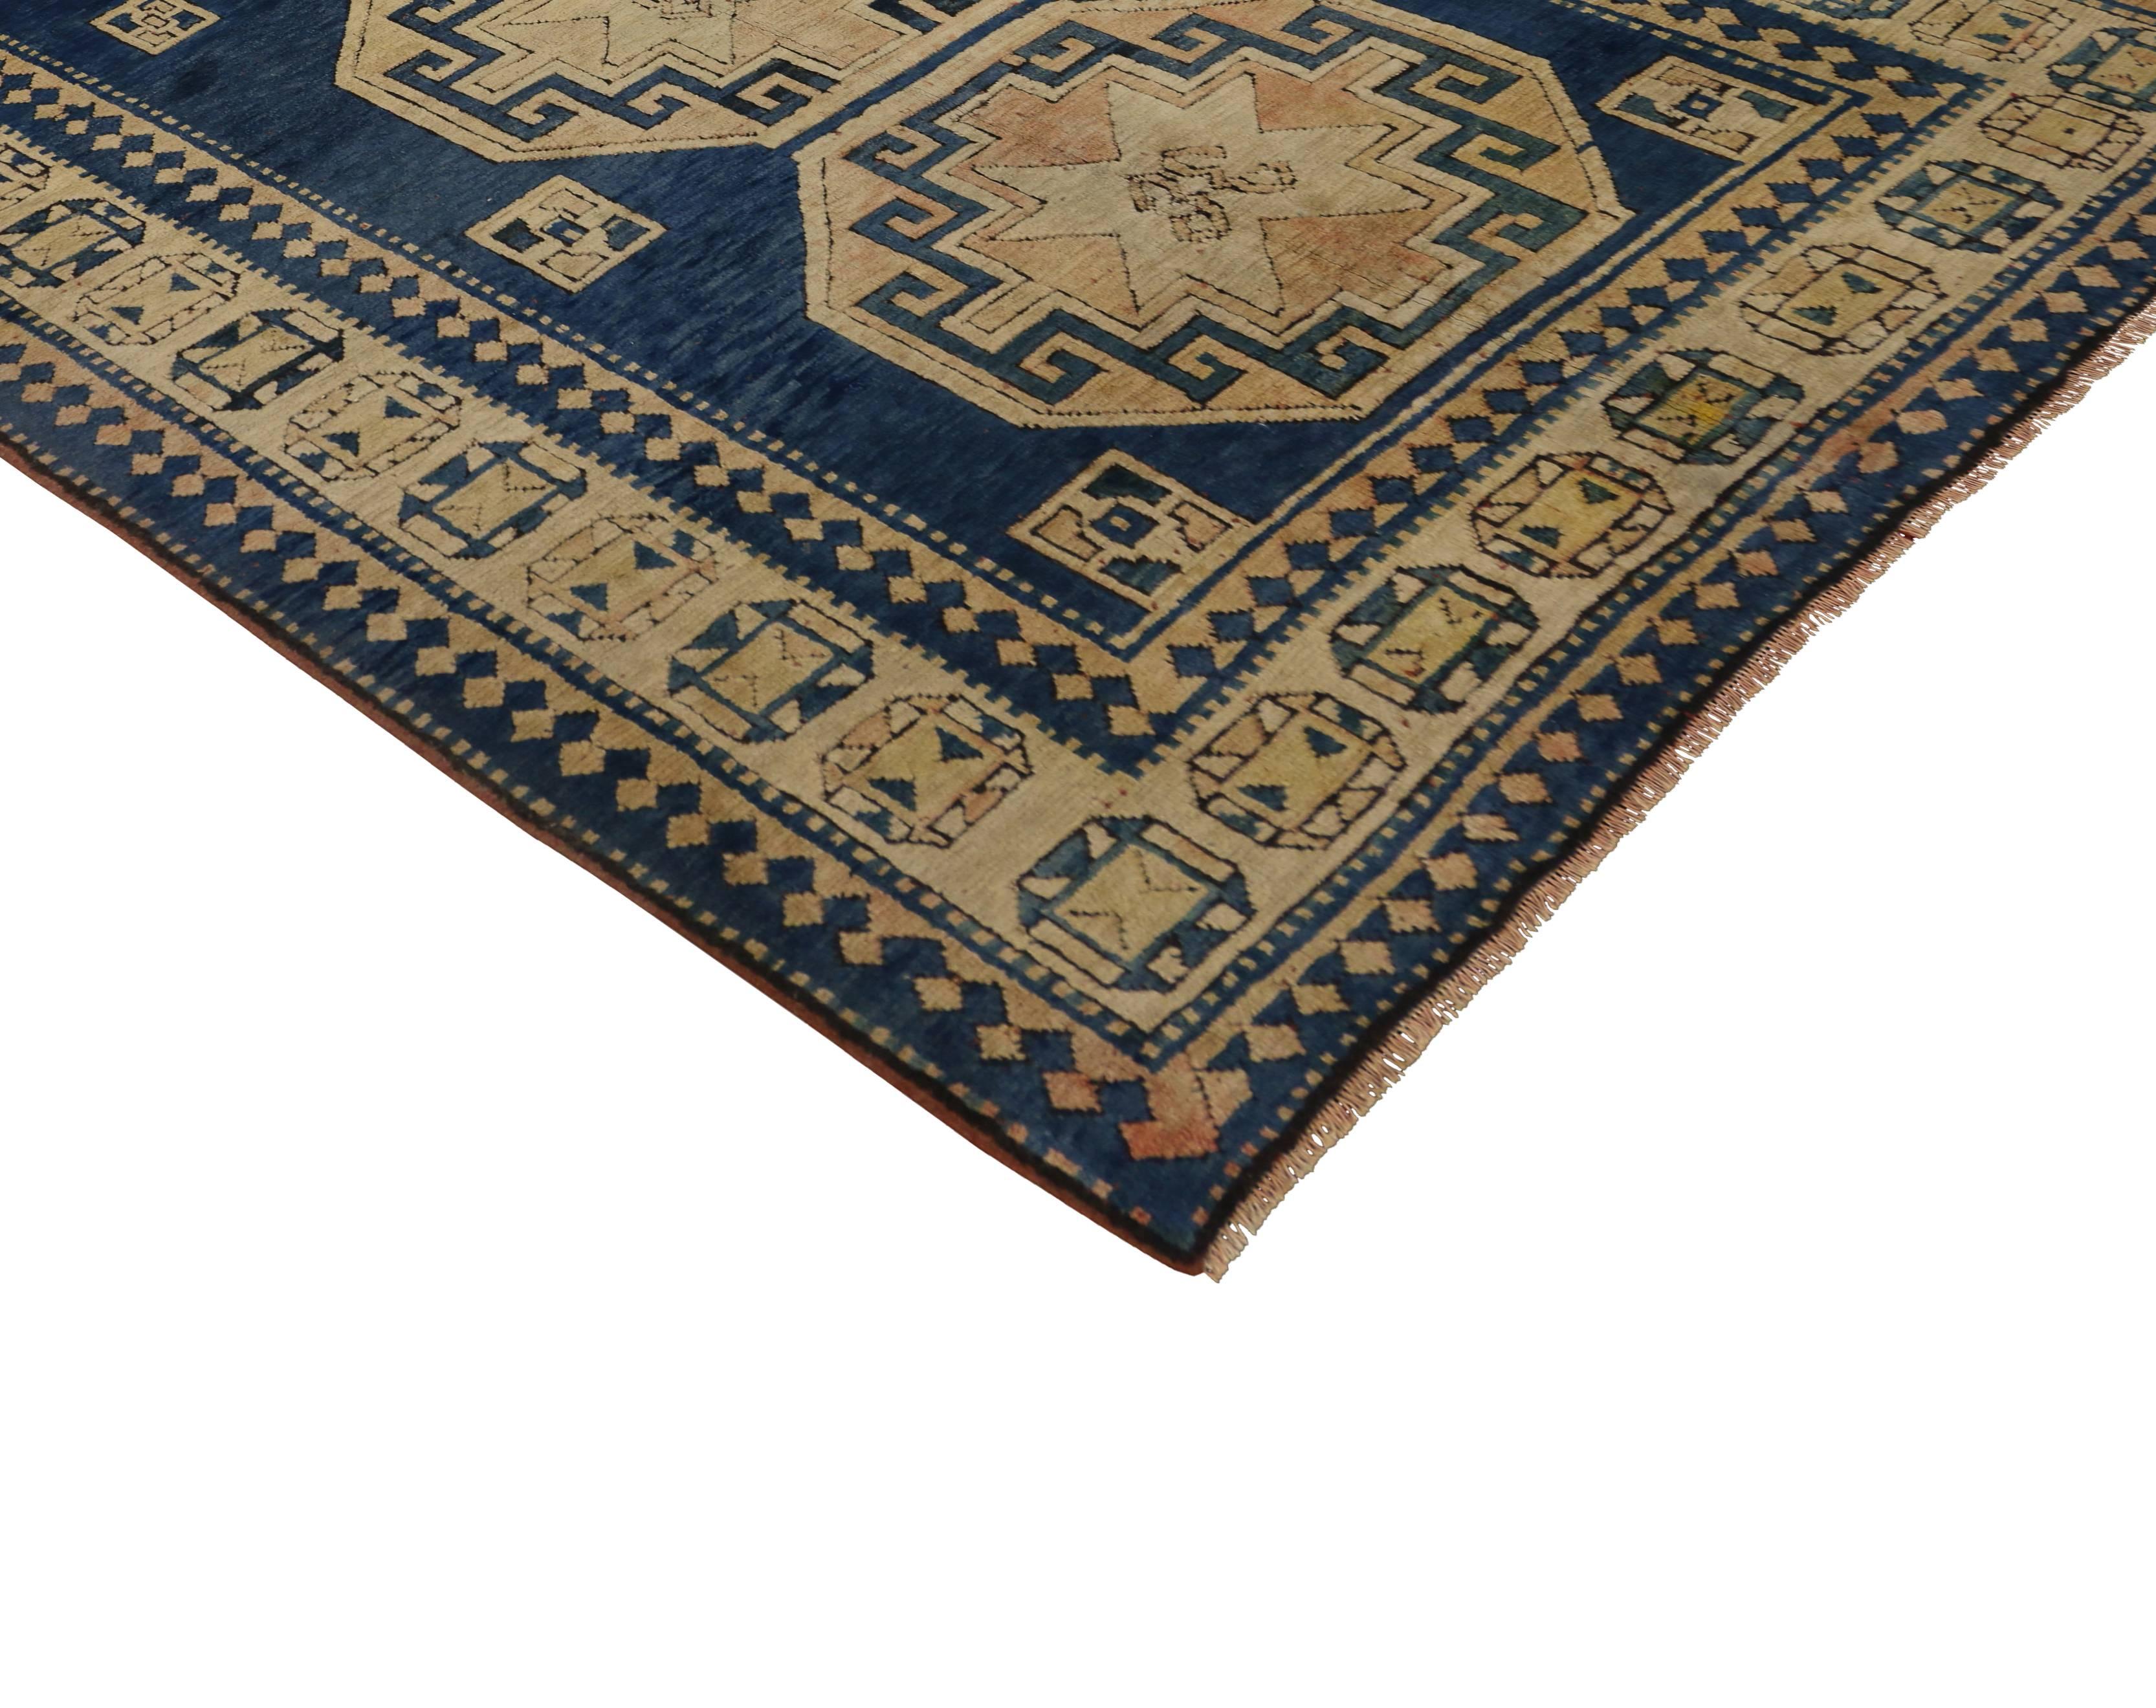 Vintage hand-knotted wool Turkish Kazak rug featuring a triple medallion on an open abrashed blue field surrounded by a geometric border. From warming up modern interiors and adding panache to formal areas, this Kazak rug seamlessly blends with